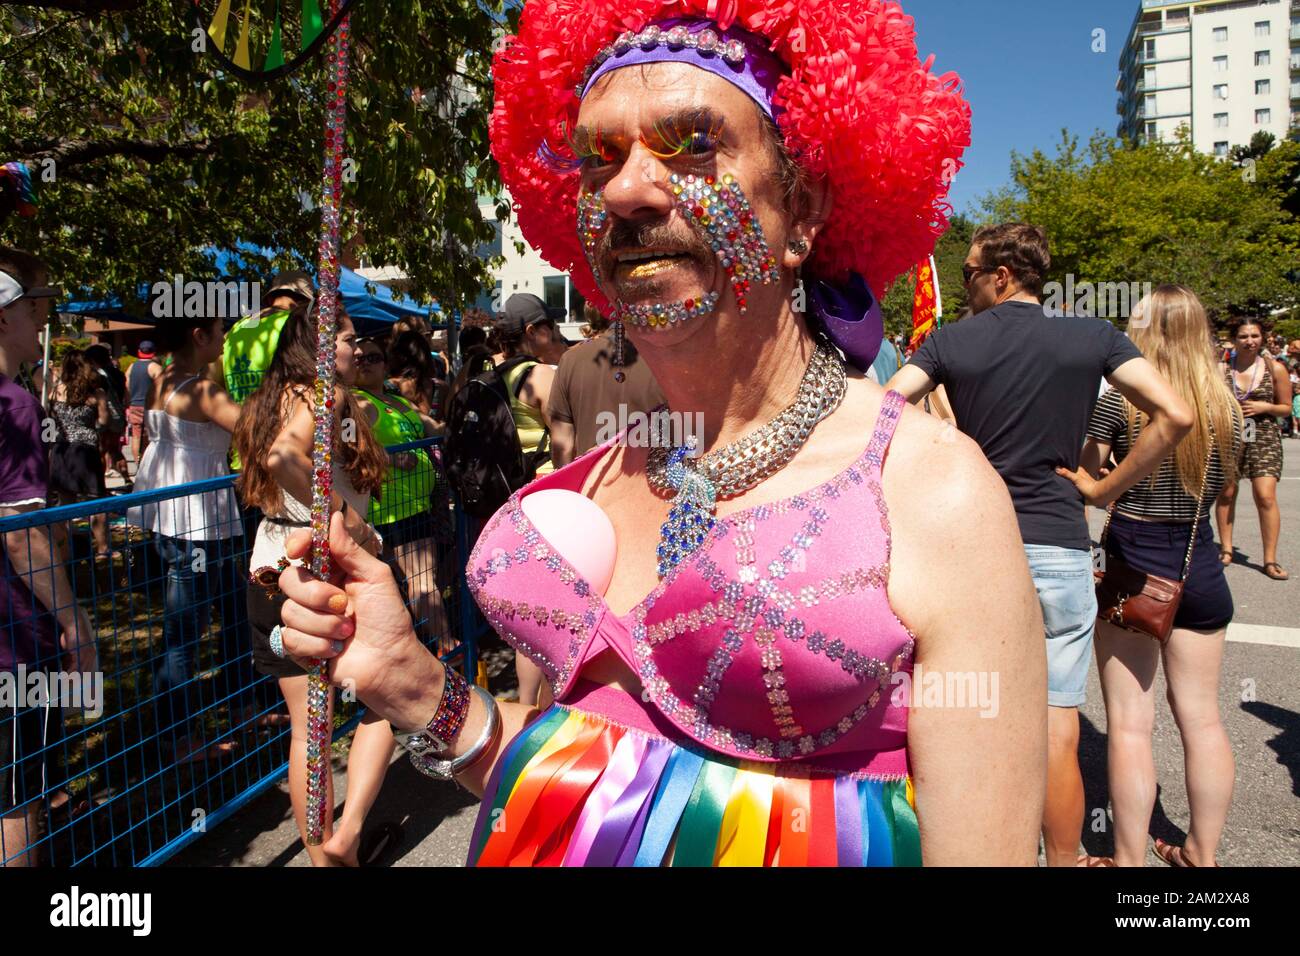 Pride parade participant with bejewelled face and bright red wig, Vancouver Pride Festival 2014, Vancouver, Canada Stock Photo